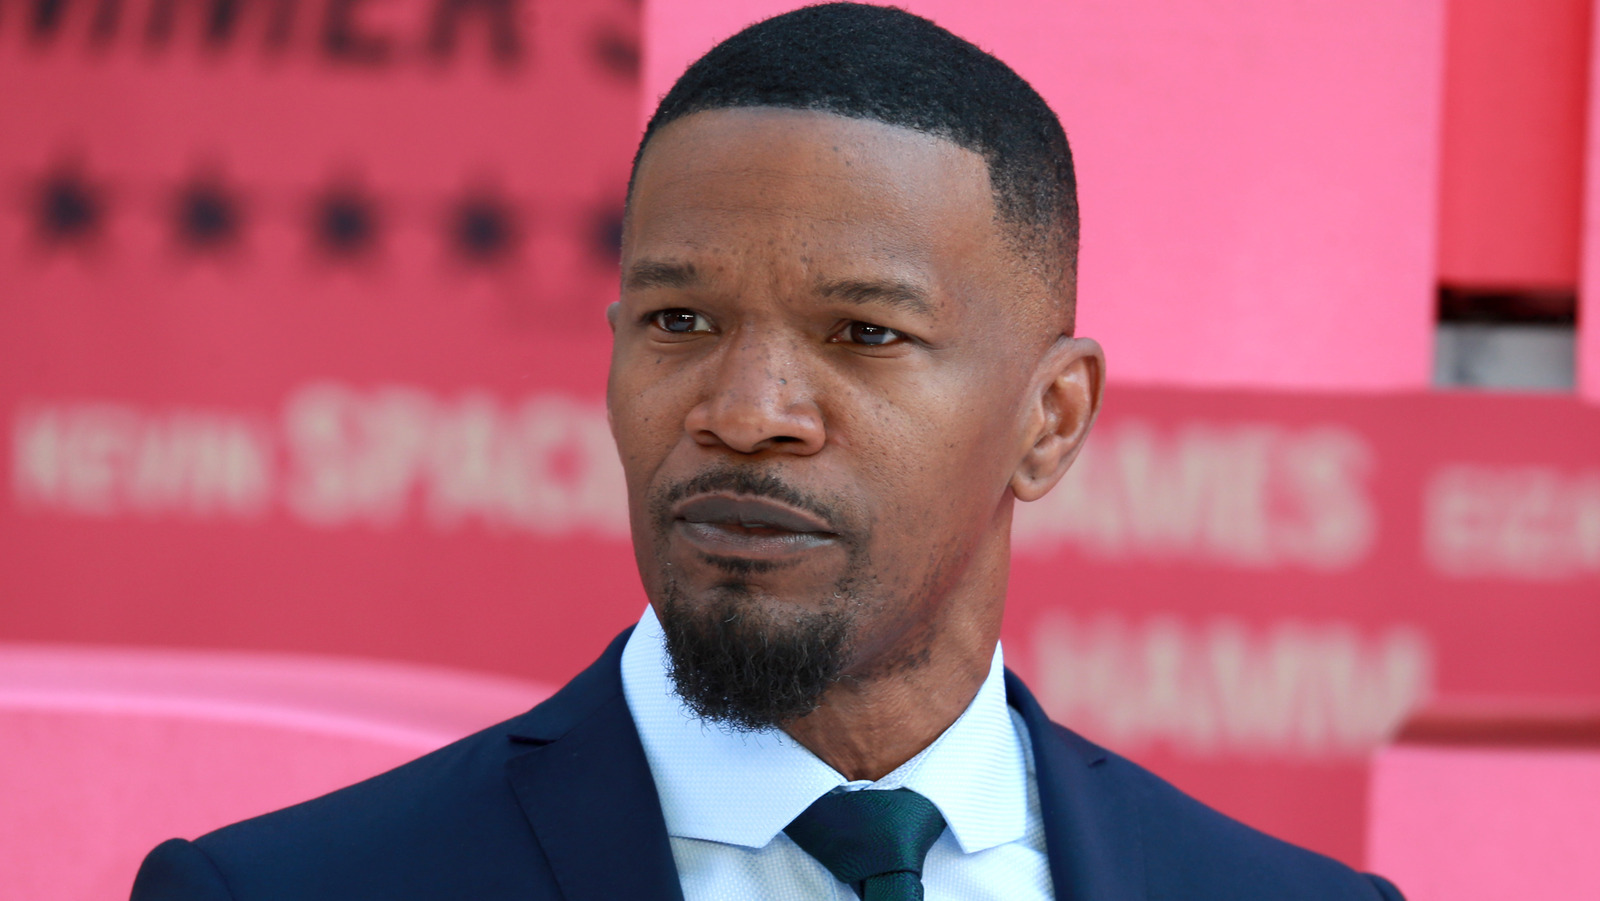 jamie foxx once sparked romance rumors with a former real housewife